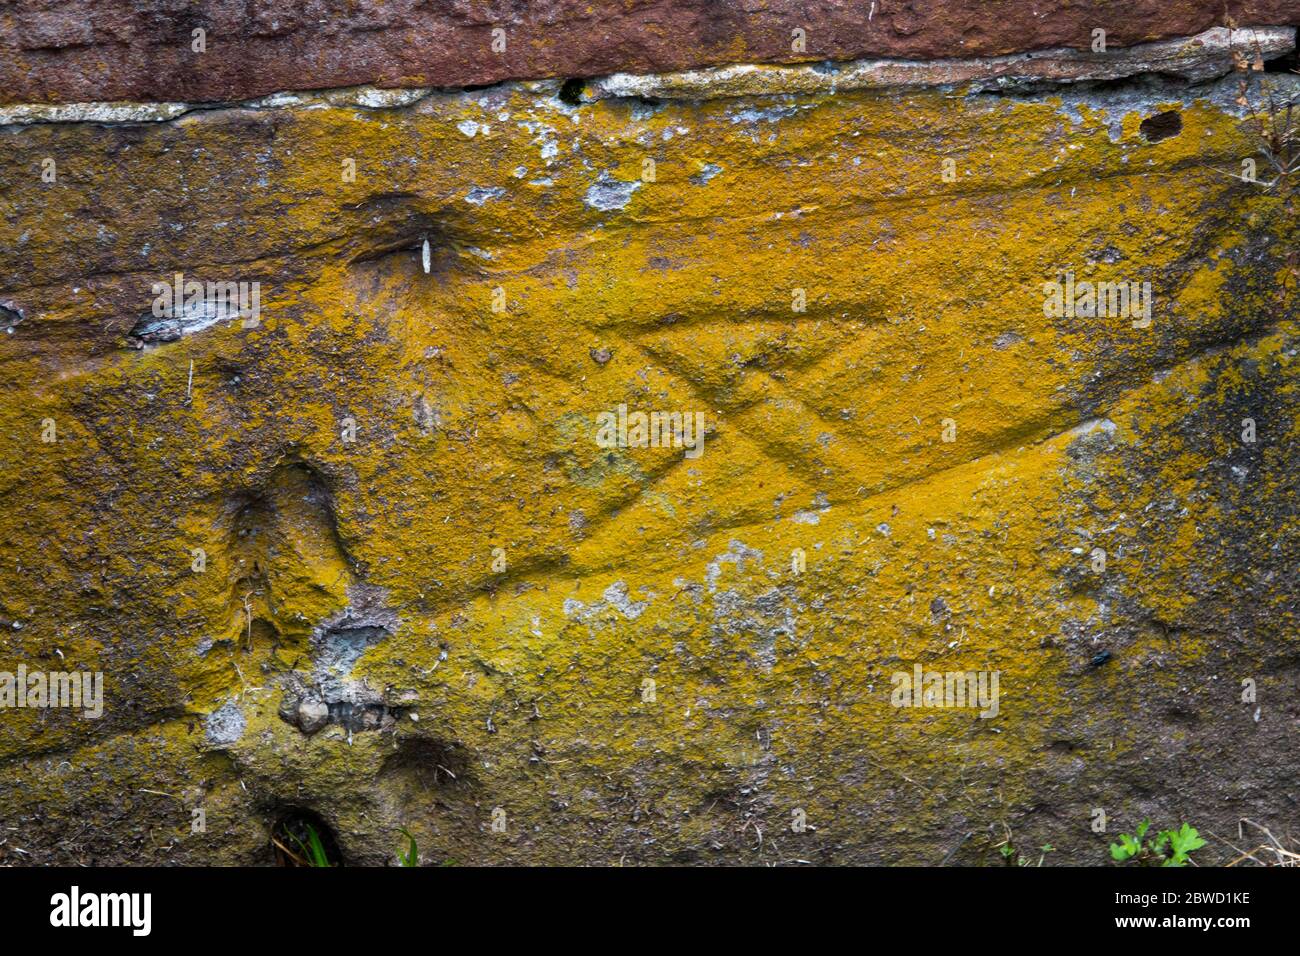 USA Maryland C & O Canal Rileys Lock  Masons Mark cut into red sandstone by the stone cutter in the mid 1800s Stock Photo